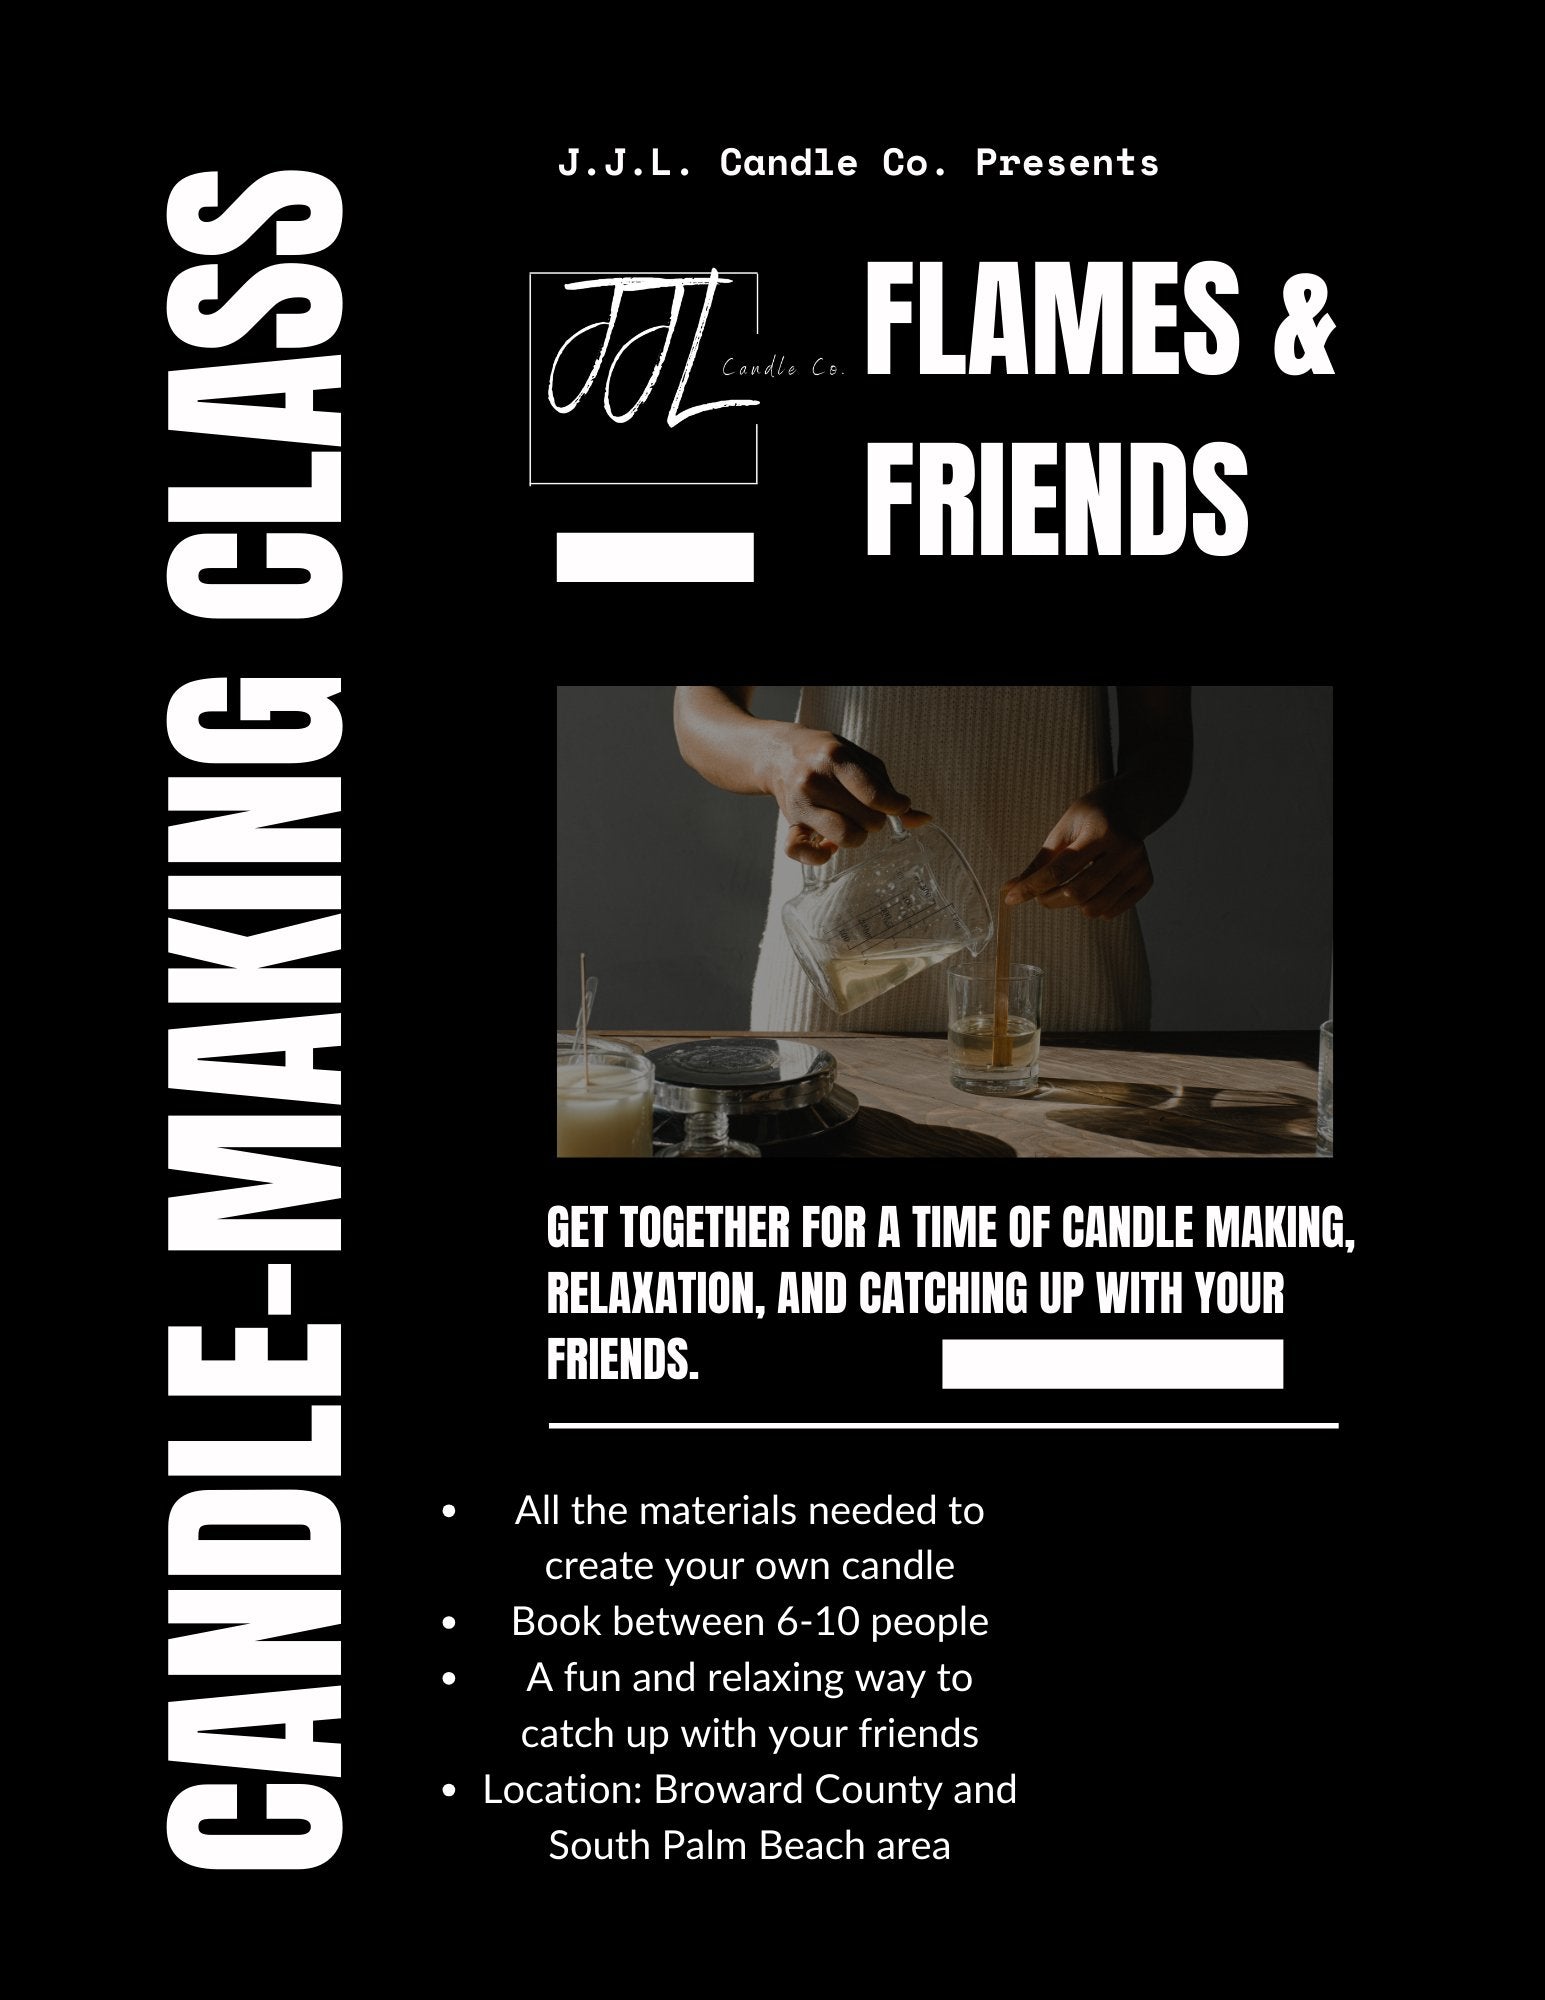 Flames and Friends: A Candle Making Experience - J.J.L. Candle Co.